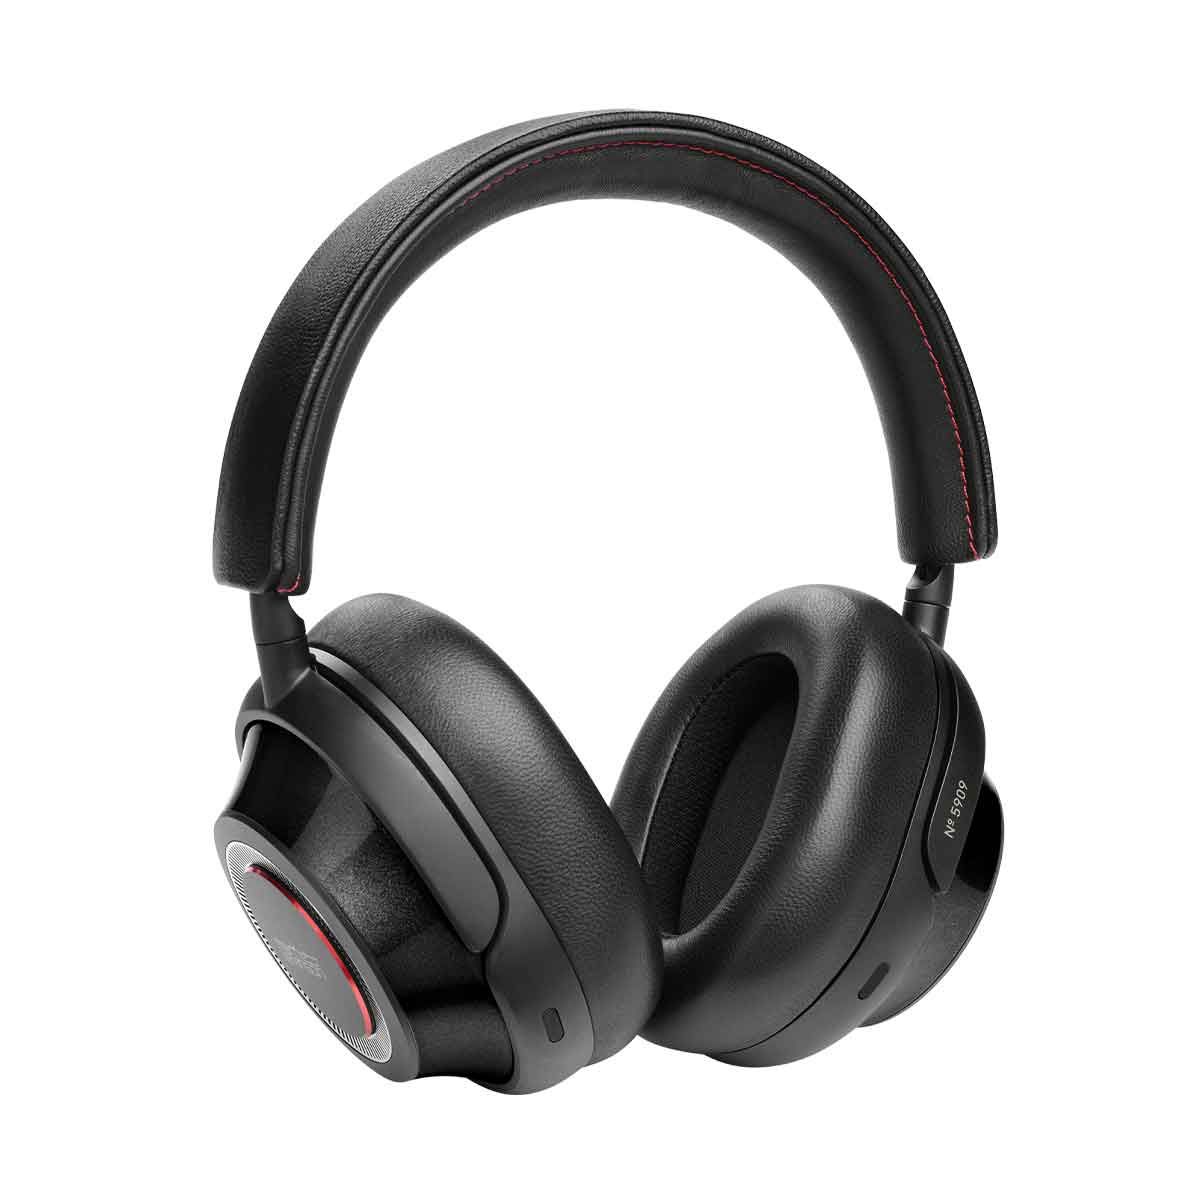 Close-up angle of the Mark Levinson № 5909 Premium Hi-Res Wireless ANC Over-Ear Headphones in Pearl Black finish.